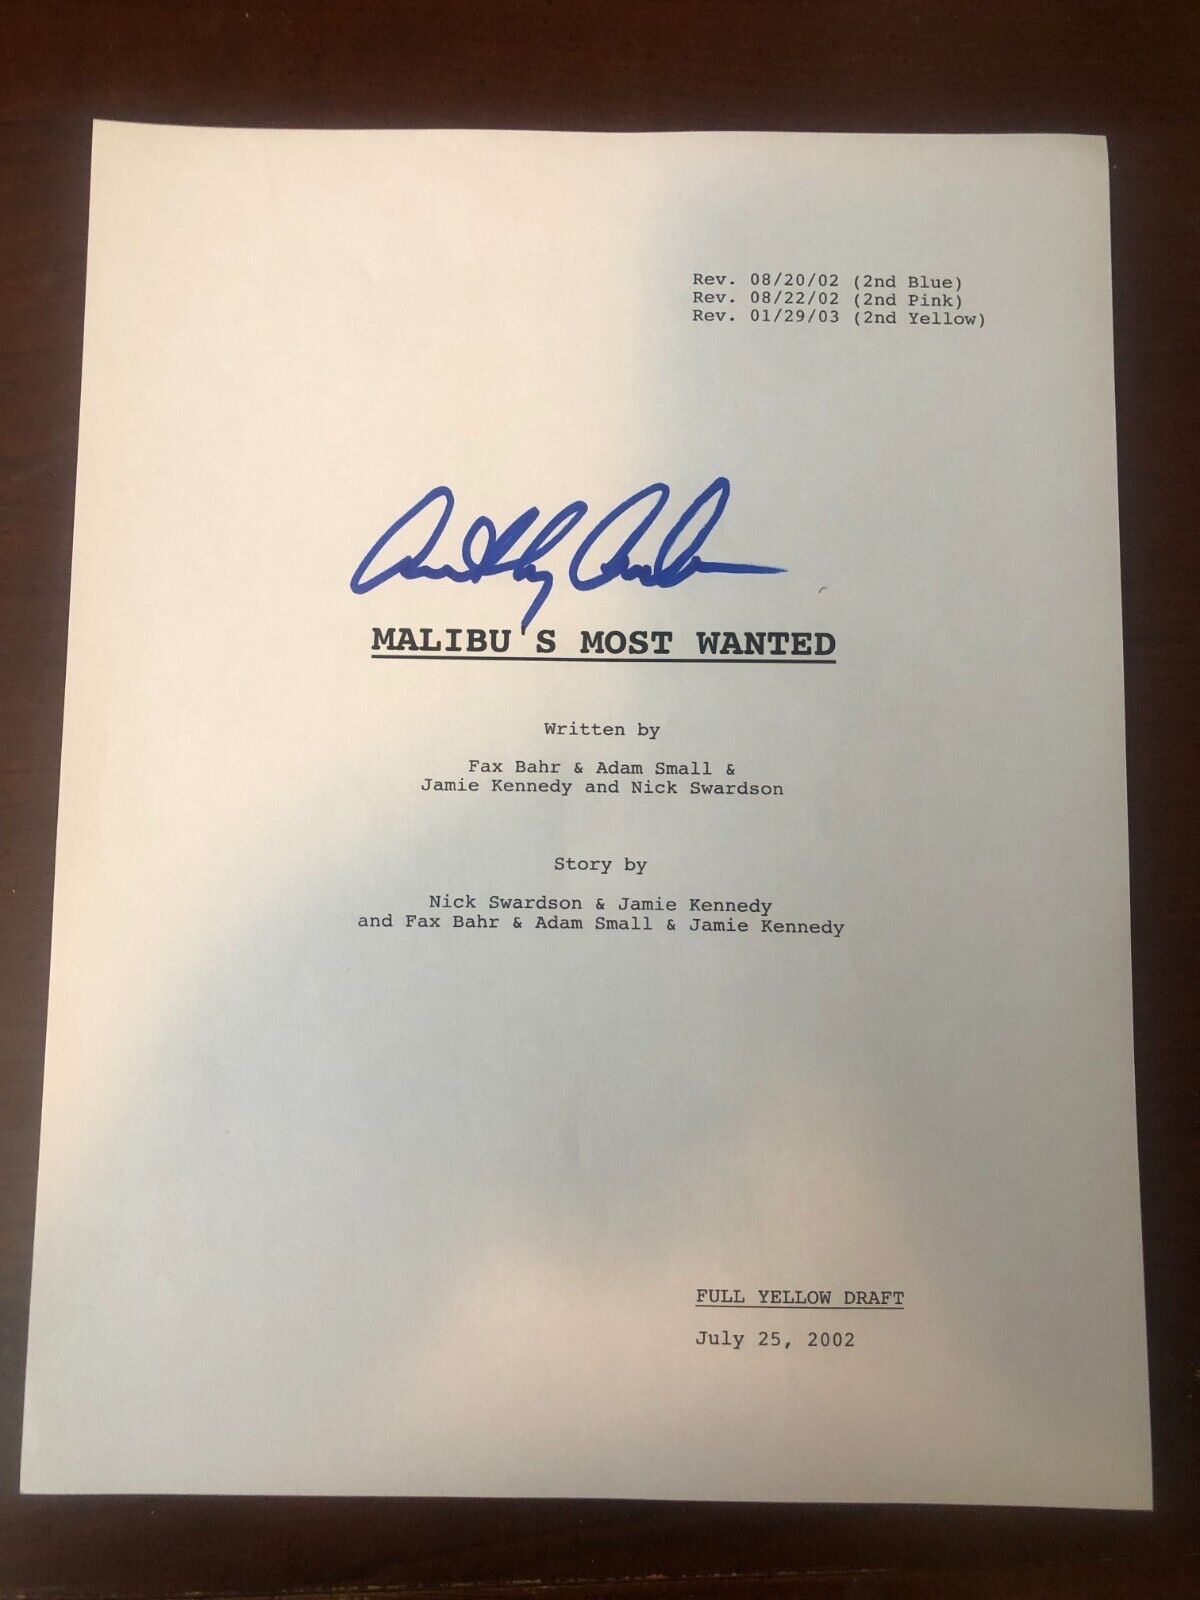 ANTHONTY ANDERSONS SIGNED MALIBU\'S MOST WANTED MOVIE SCRIPT COVER